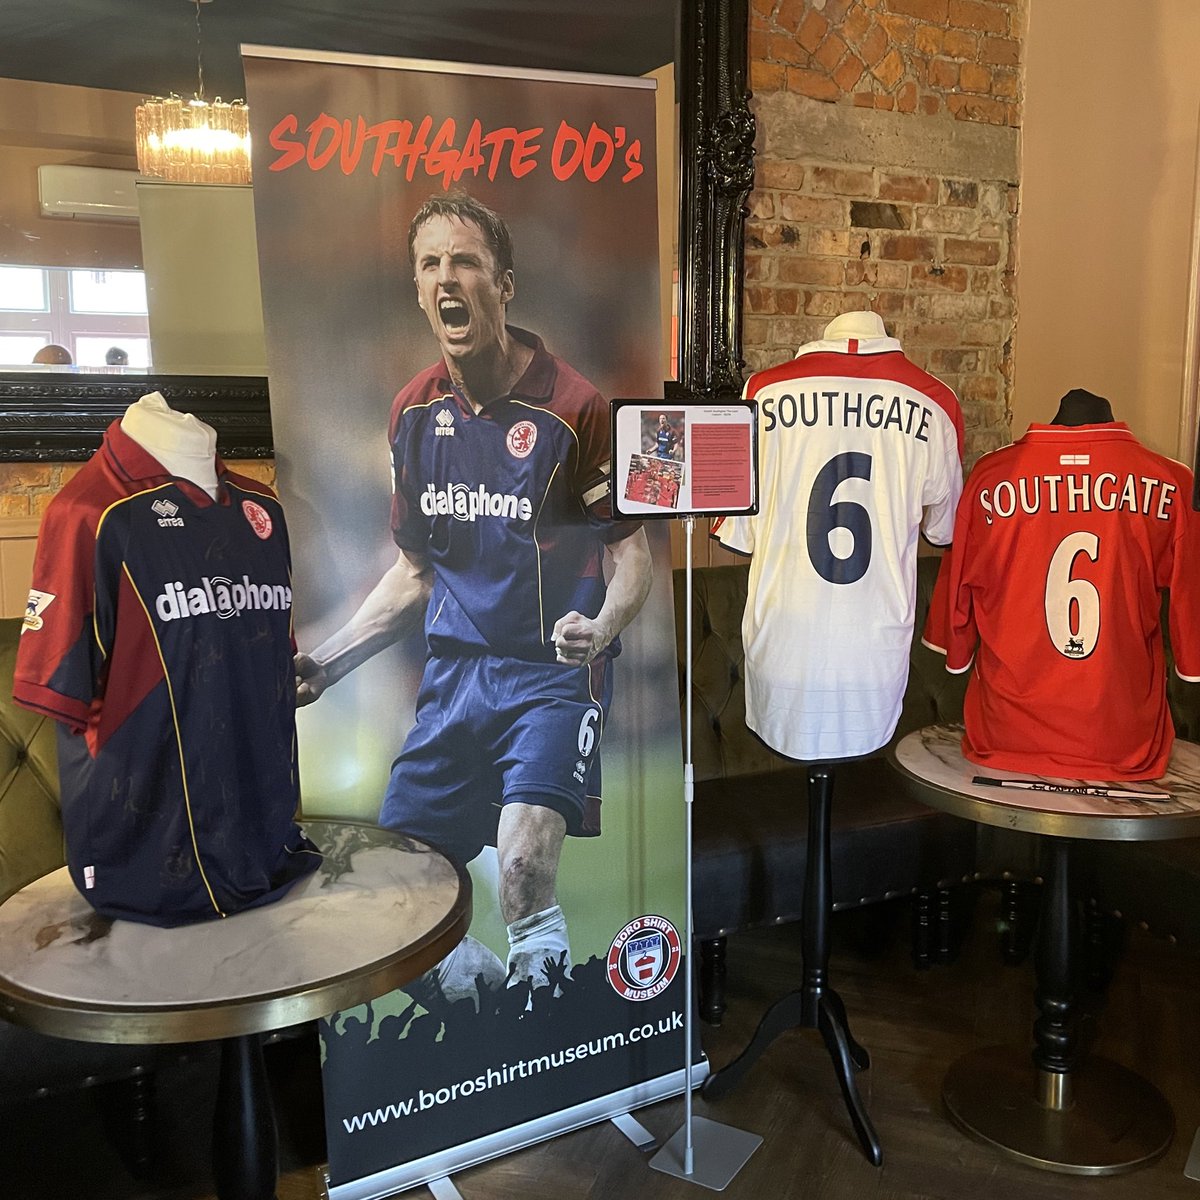 📸 | Some photos from today’s ‘Captains’ exhibition @BloomTees. Massive thanks to everyone that popped in for look / natter, it’s always a pleasure to chat about sweaty shirts.